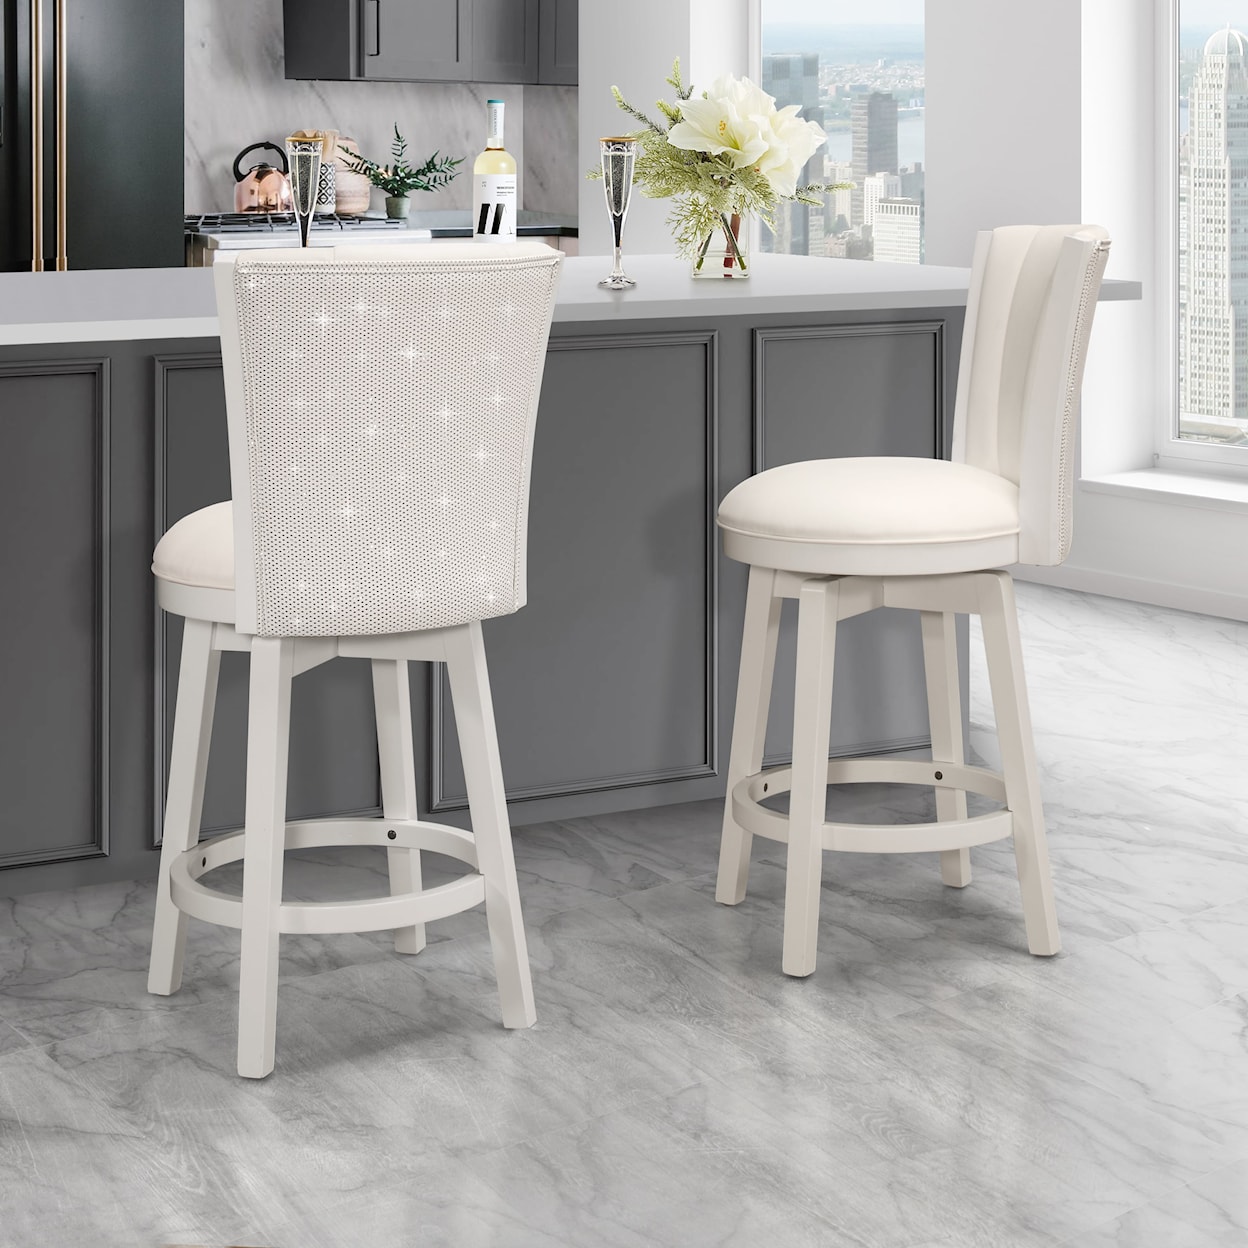 Hillsdale Gianna Counter Stool